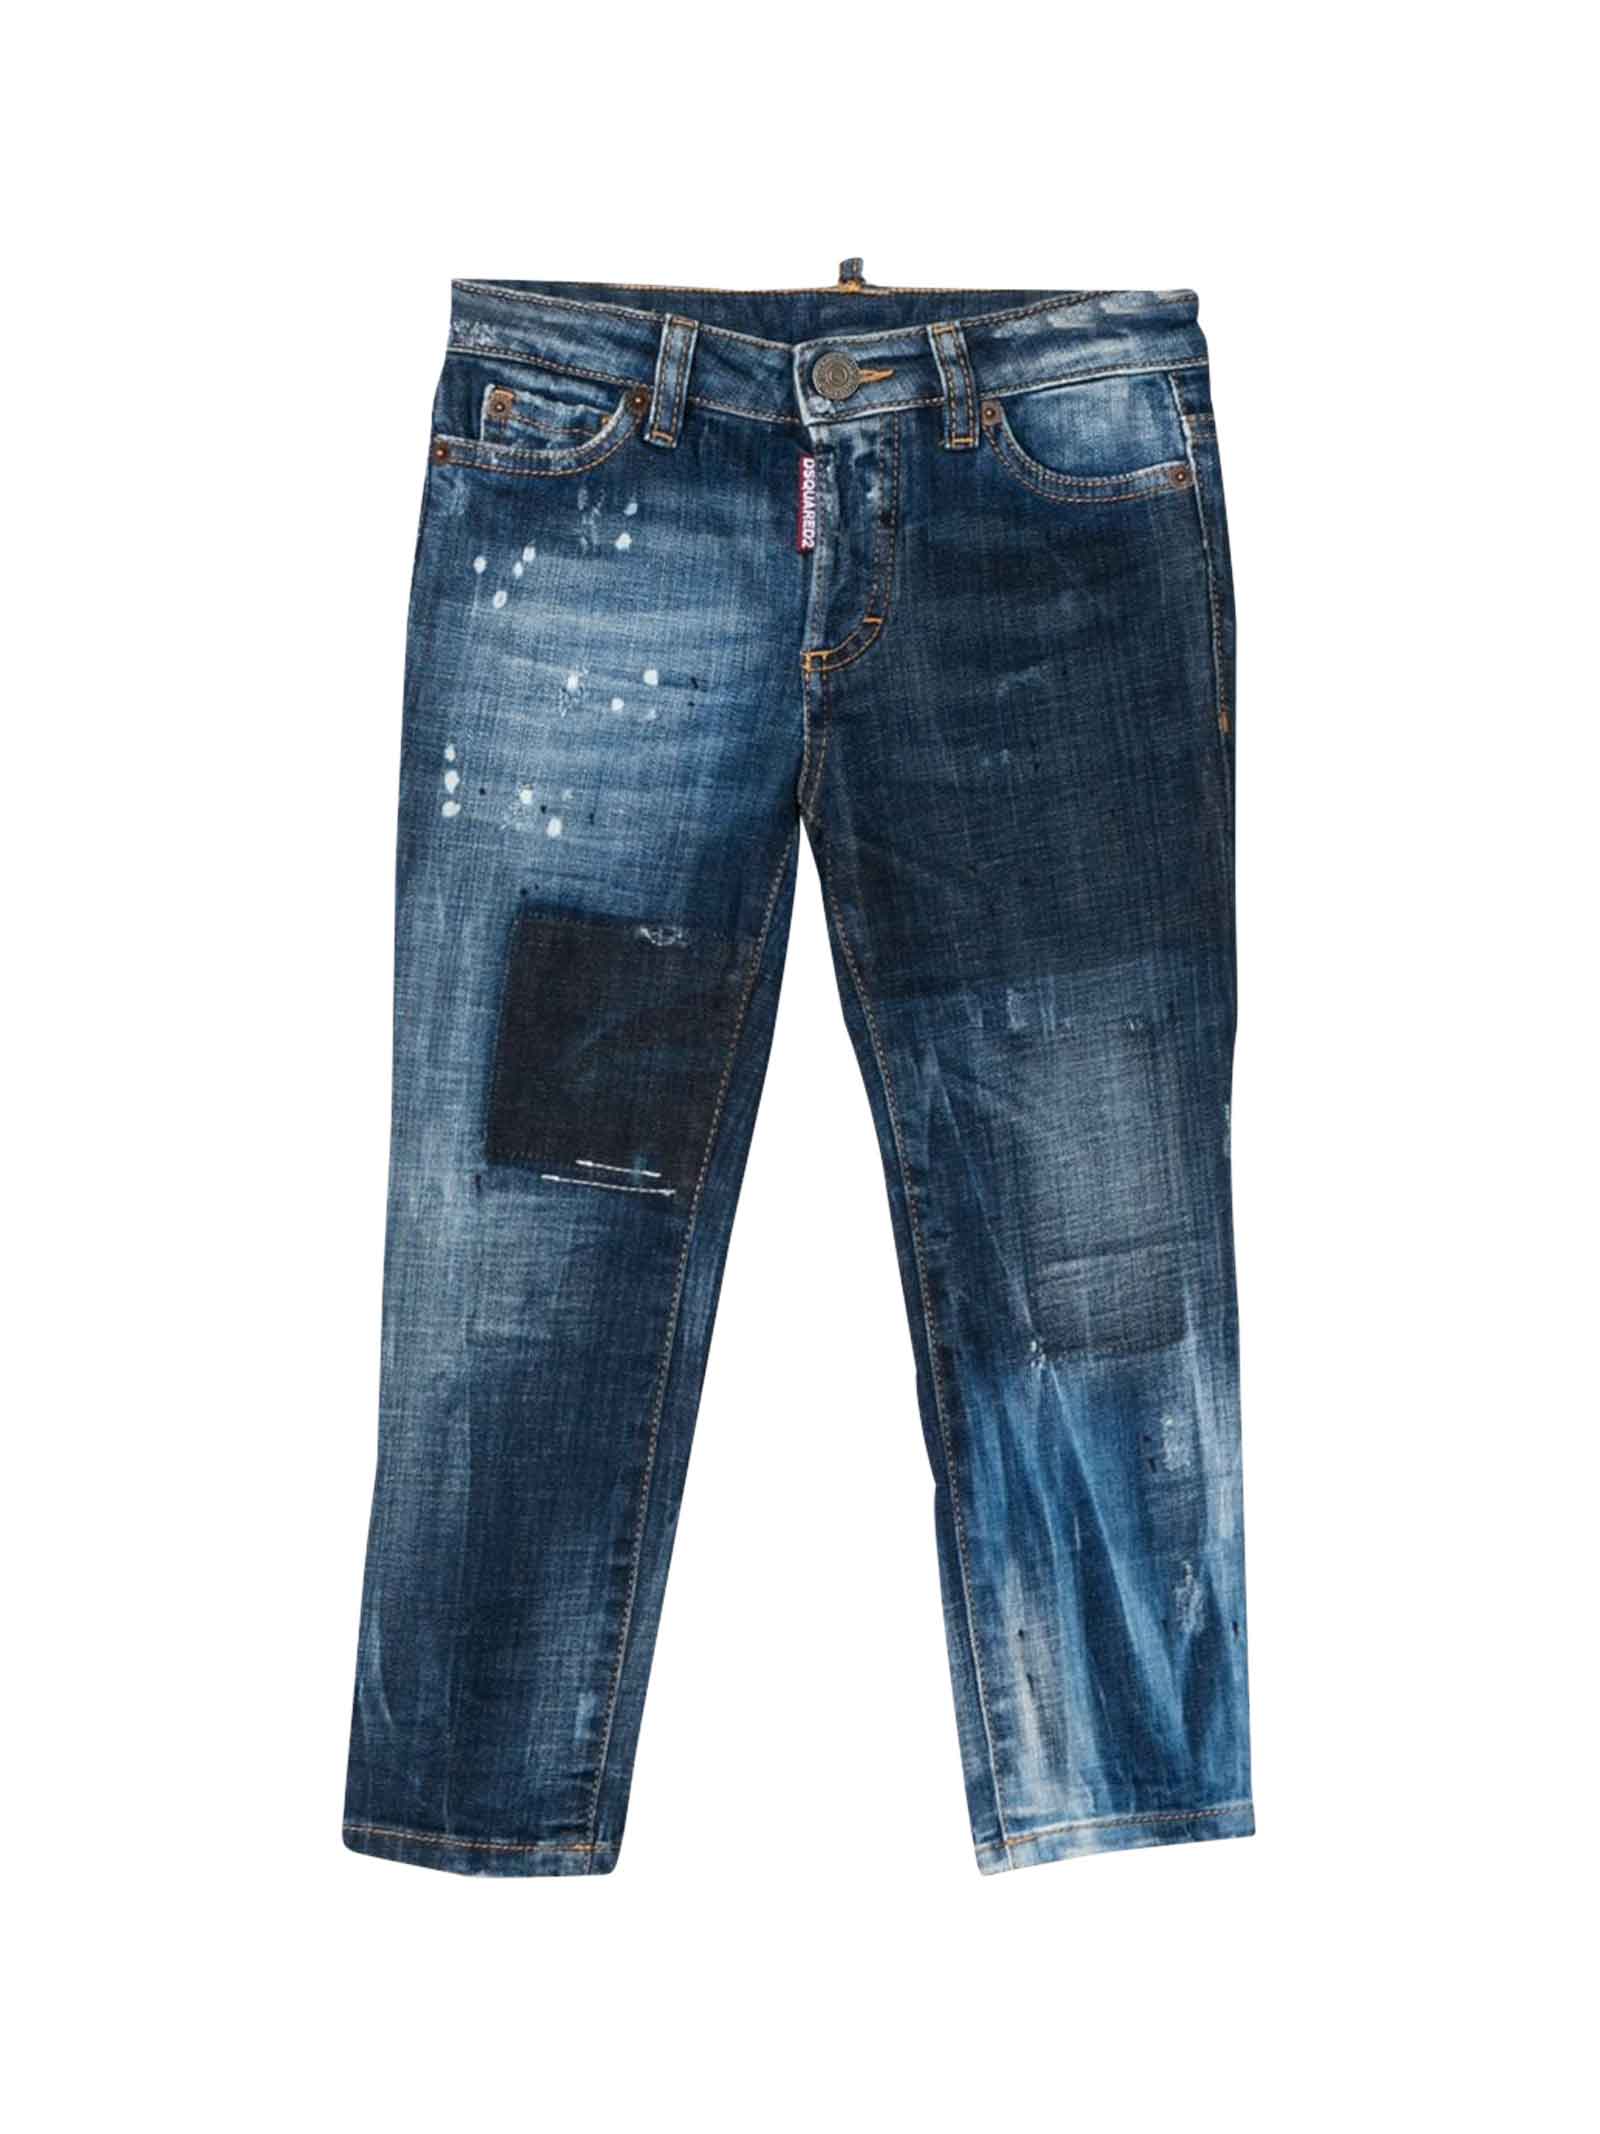 DSQUARED2 SLIM JEANS WITH VINTAGE EFFECT,11410007